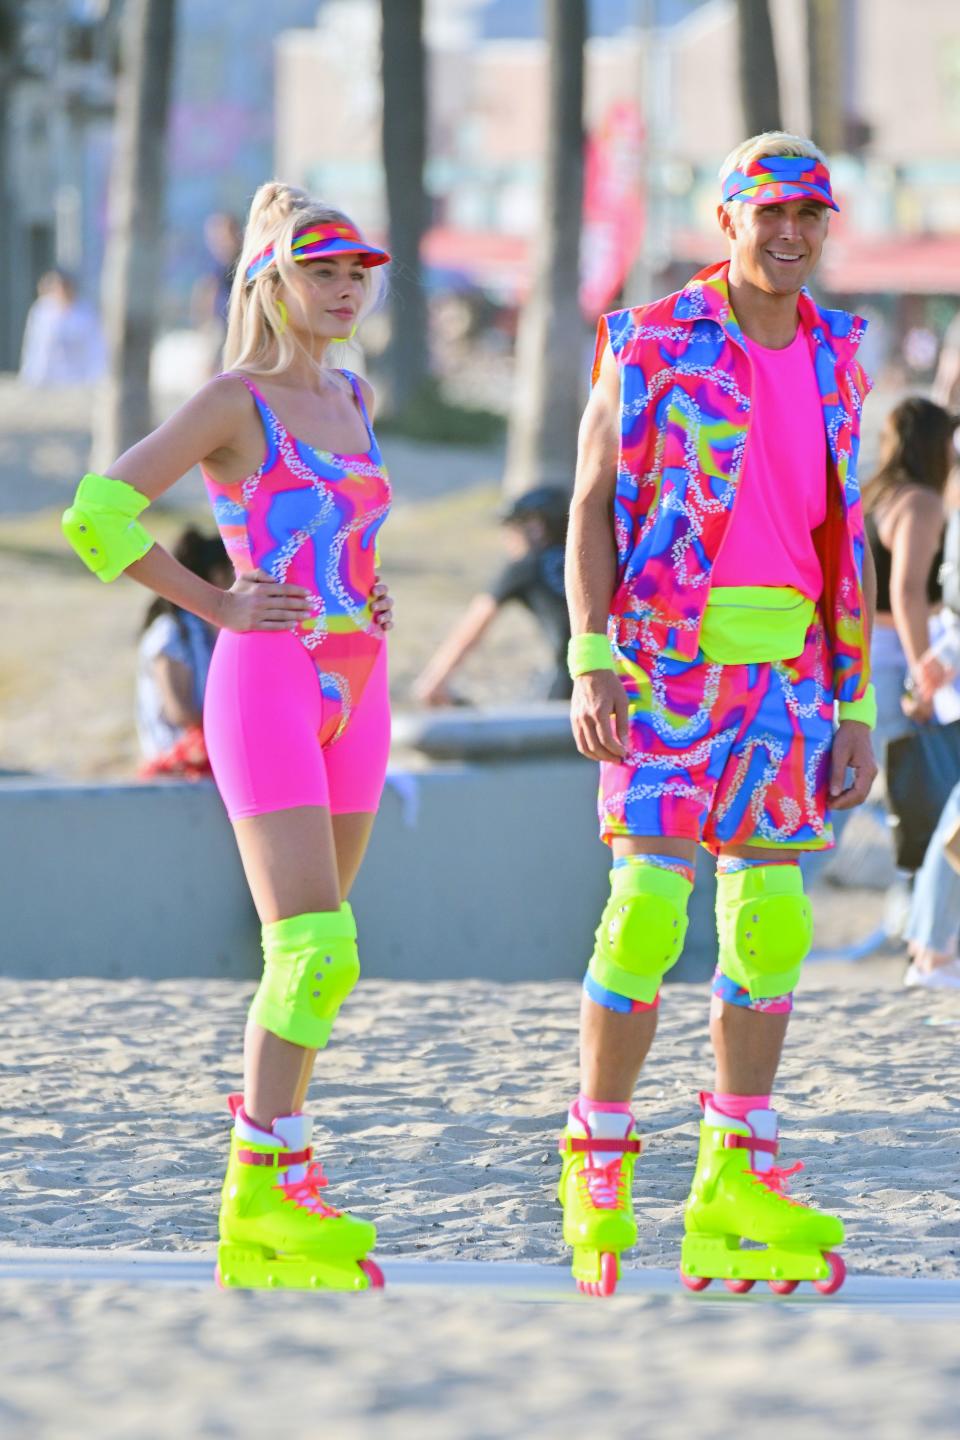 Margot Robbie and Ryan Gosling as Barbie and Ken for the new Barbie film. They wear neon spandex clothing and bright yellow roller skates. (Getty Images)